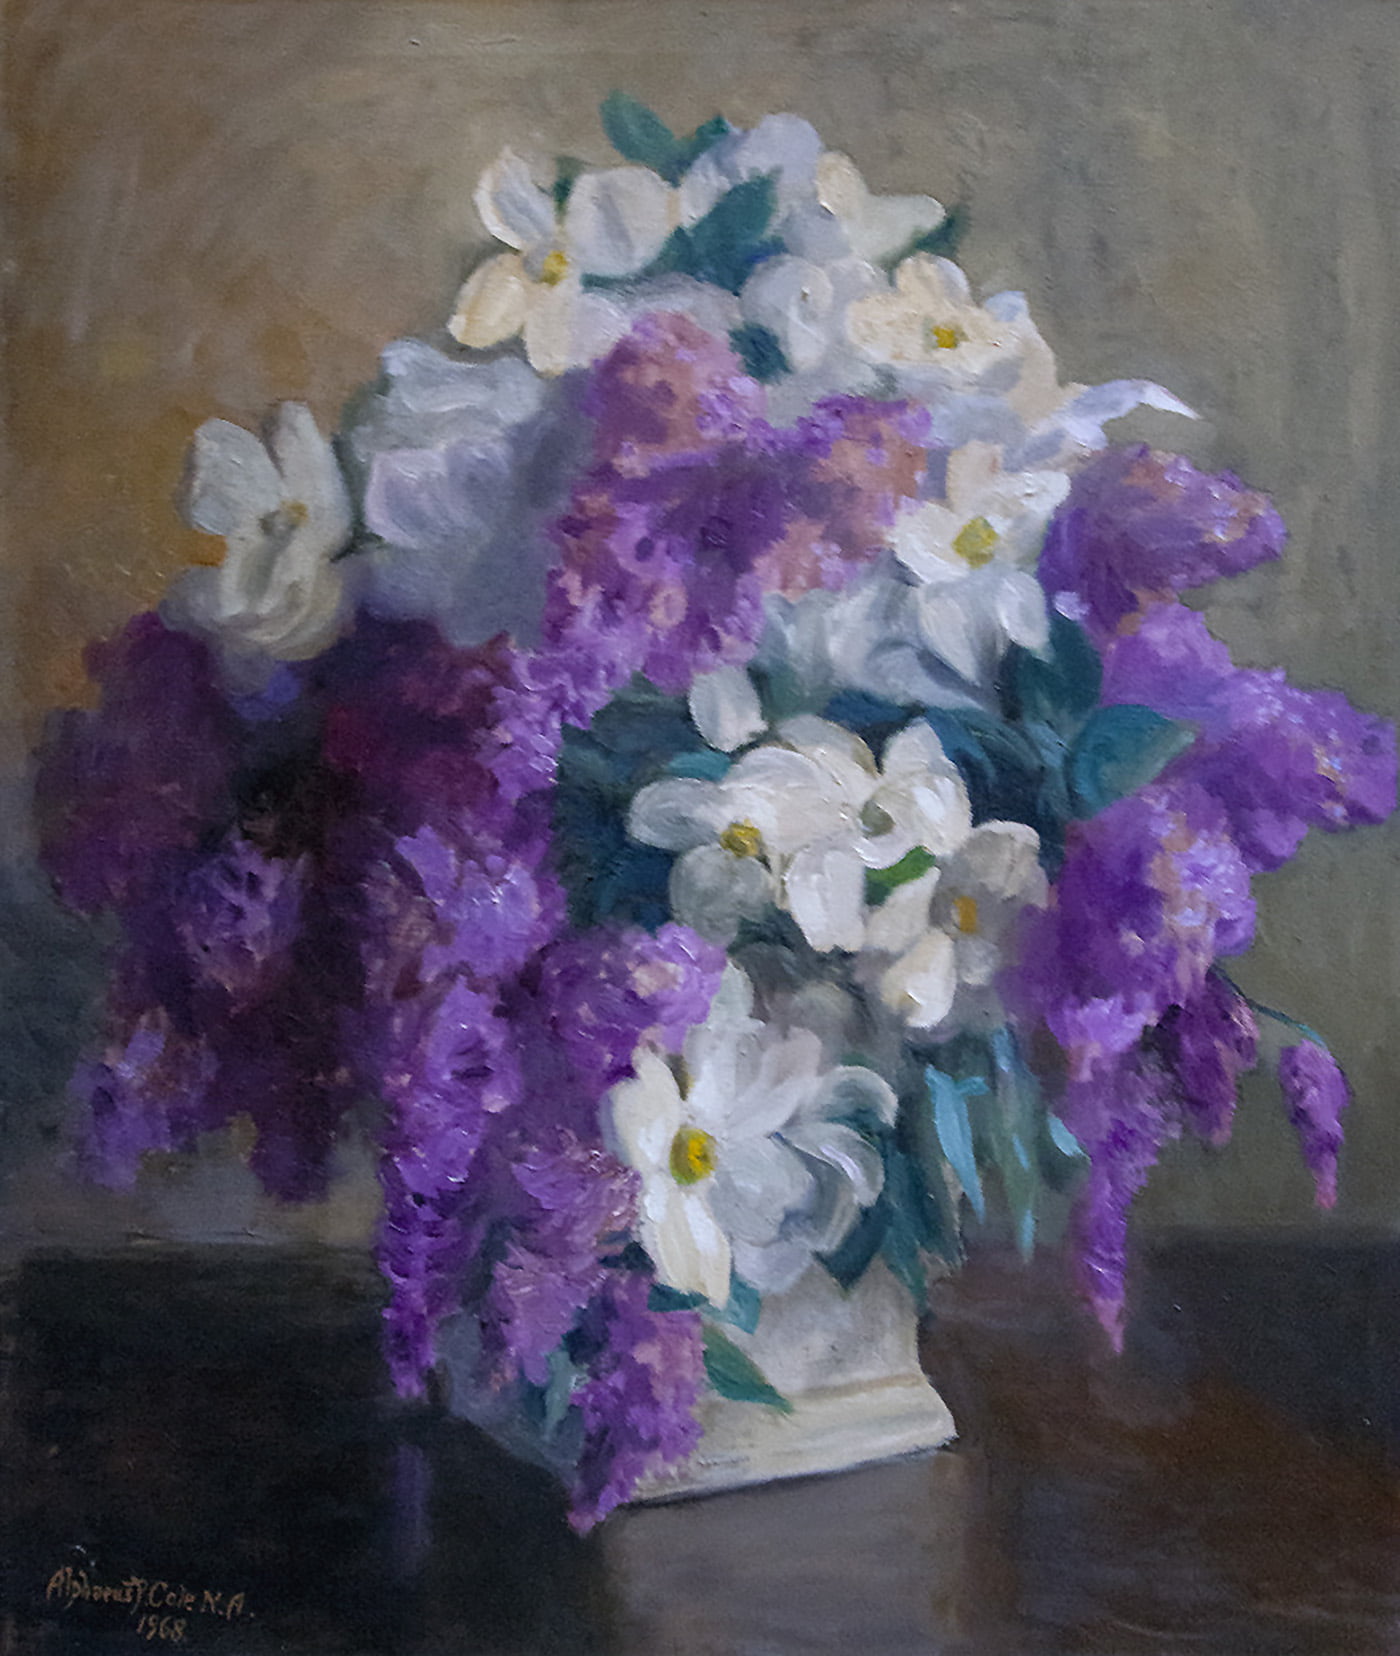 White daisy-like flowers and droopy light purple blossoms nearly cover up the white vase they are in.